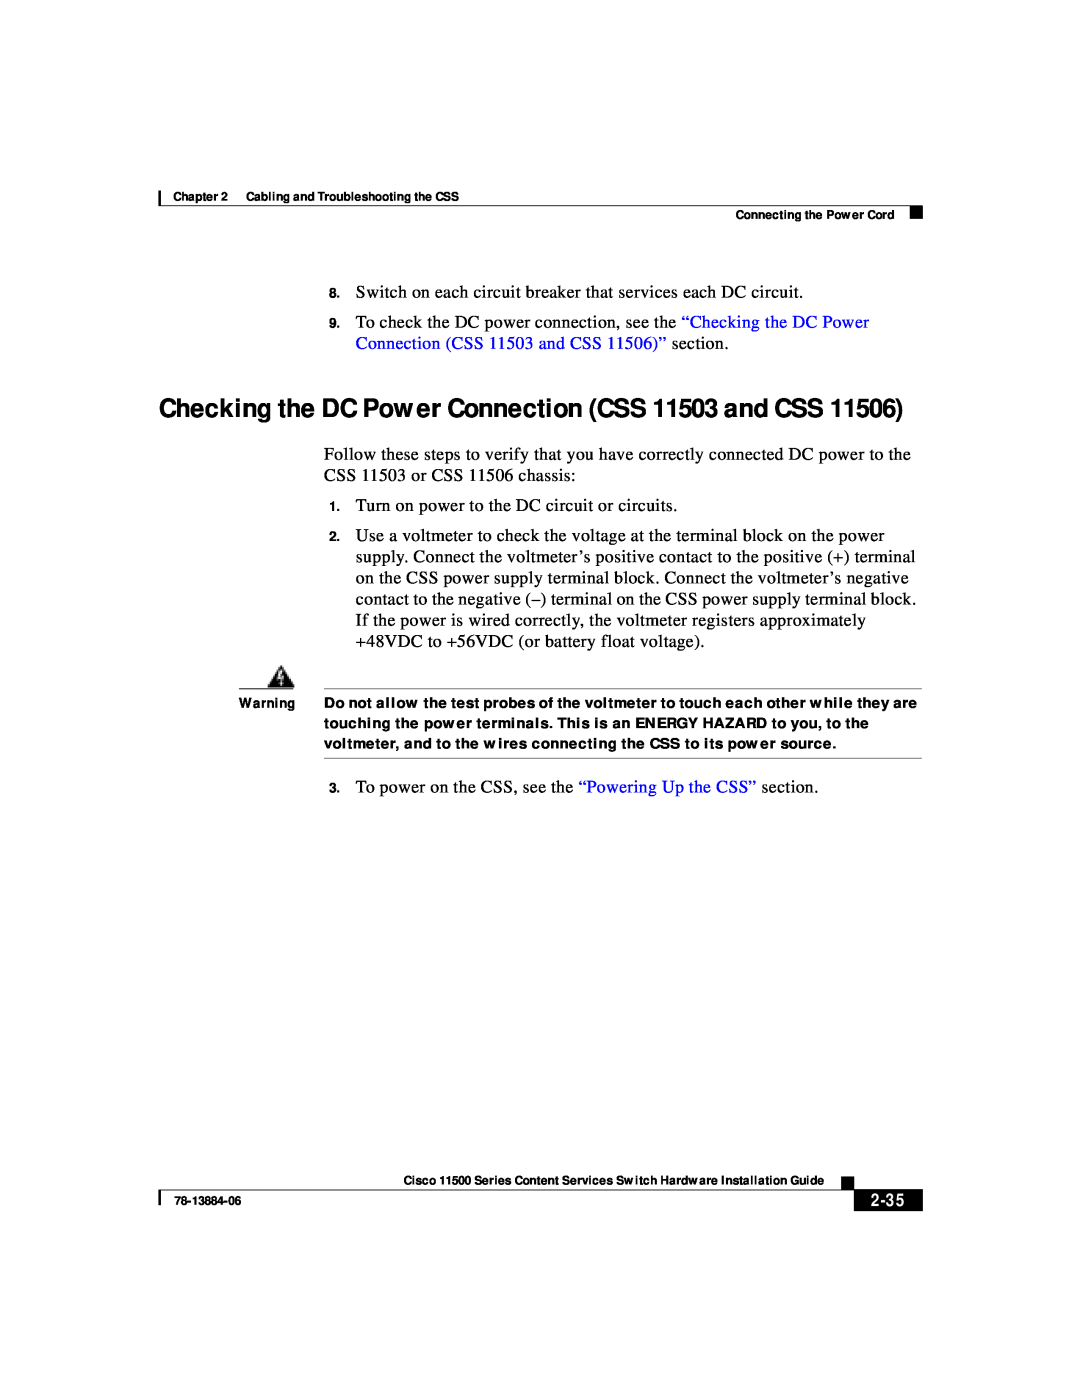 Cisco Systems 11500 Series manual Checking the DC Power Connection CSS 11503 and CSS, 2-35 